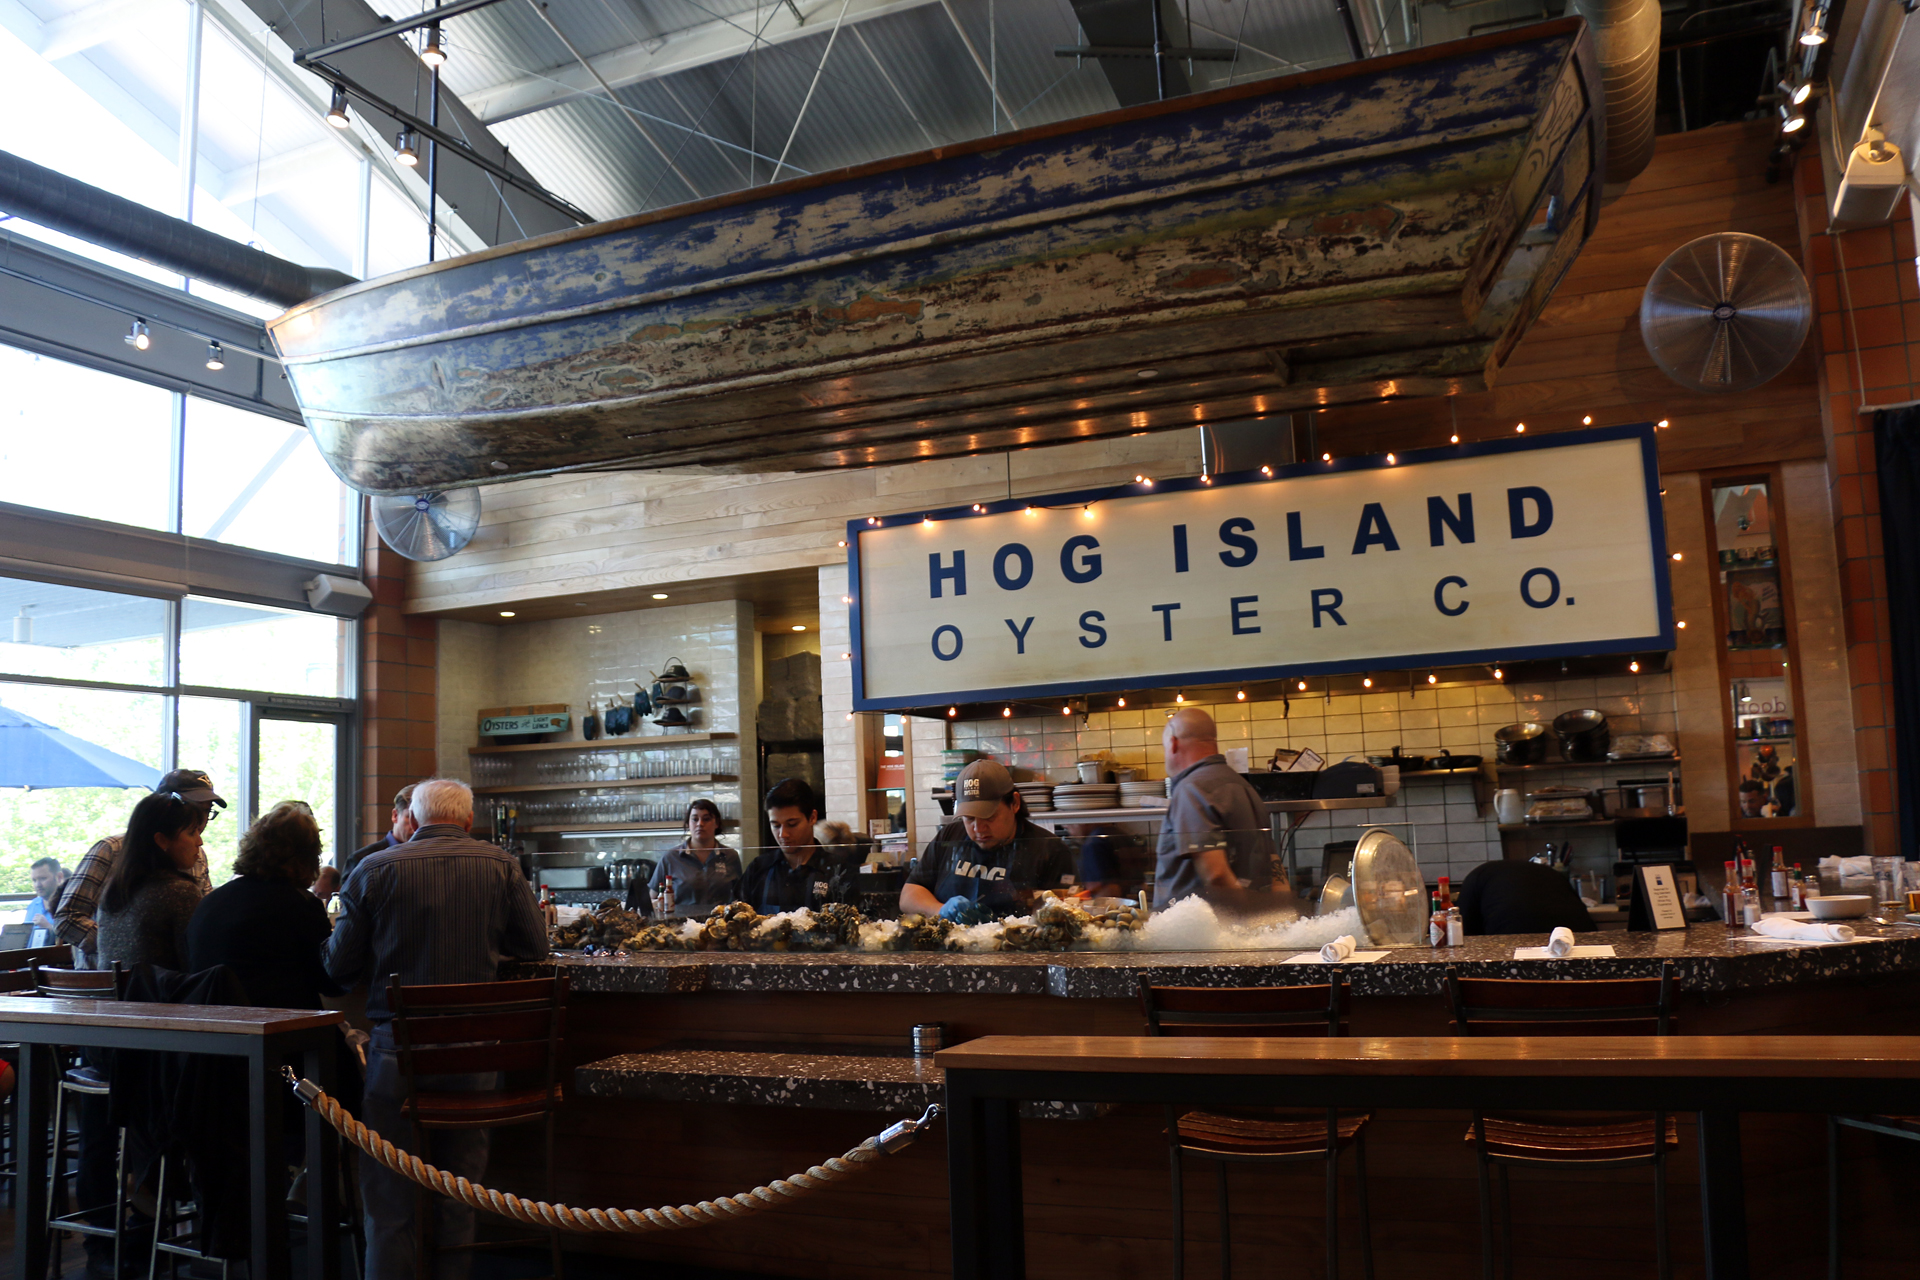 The oyster bar at Hog Island Oyster Co.